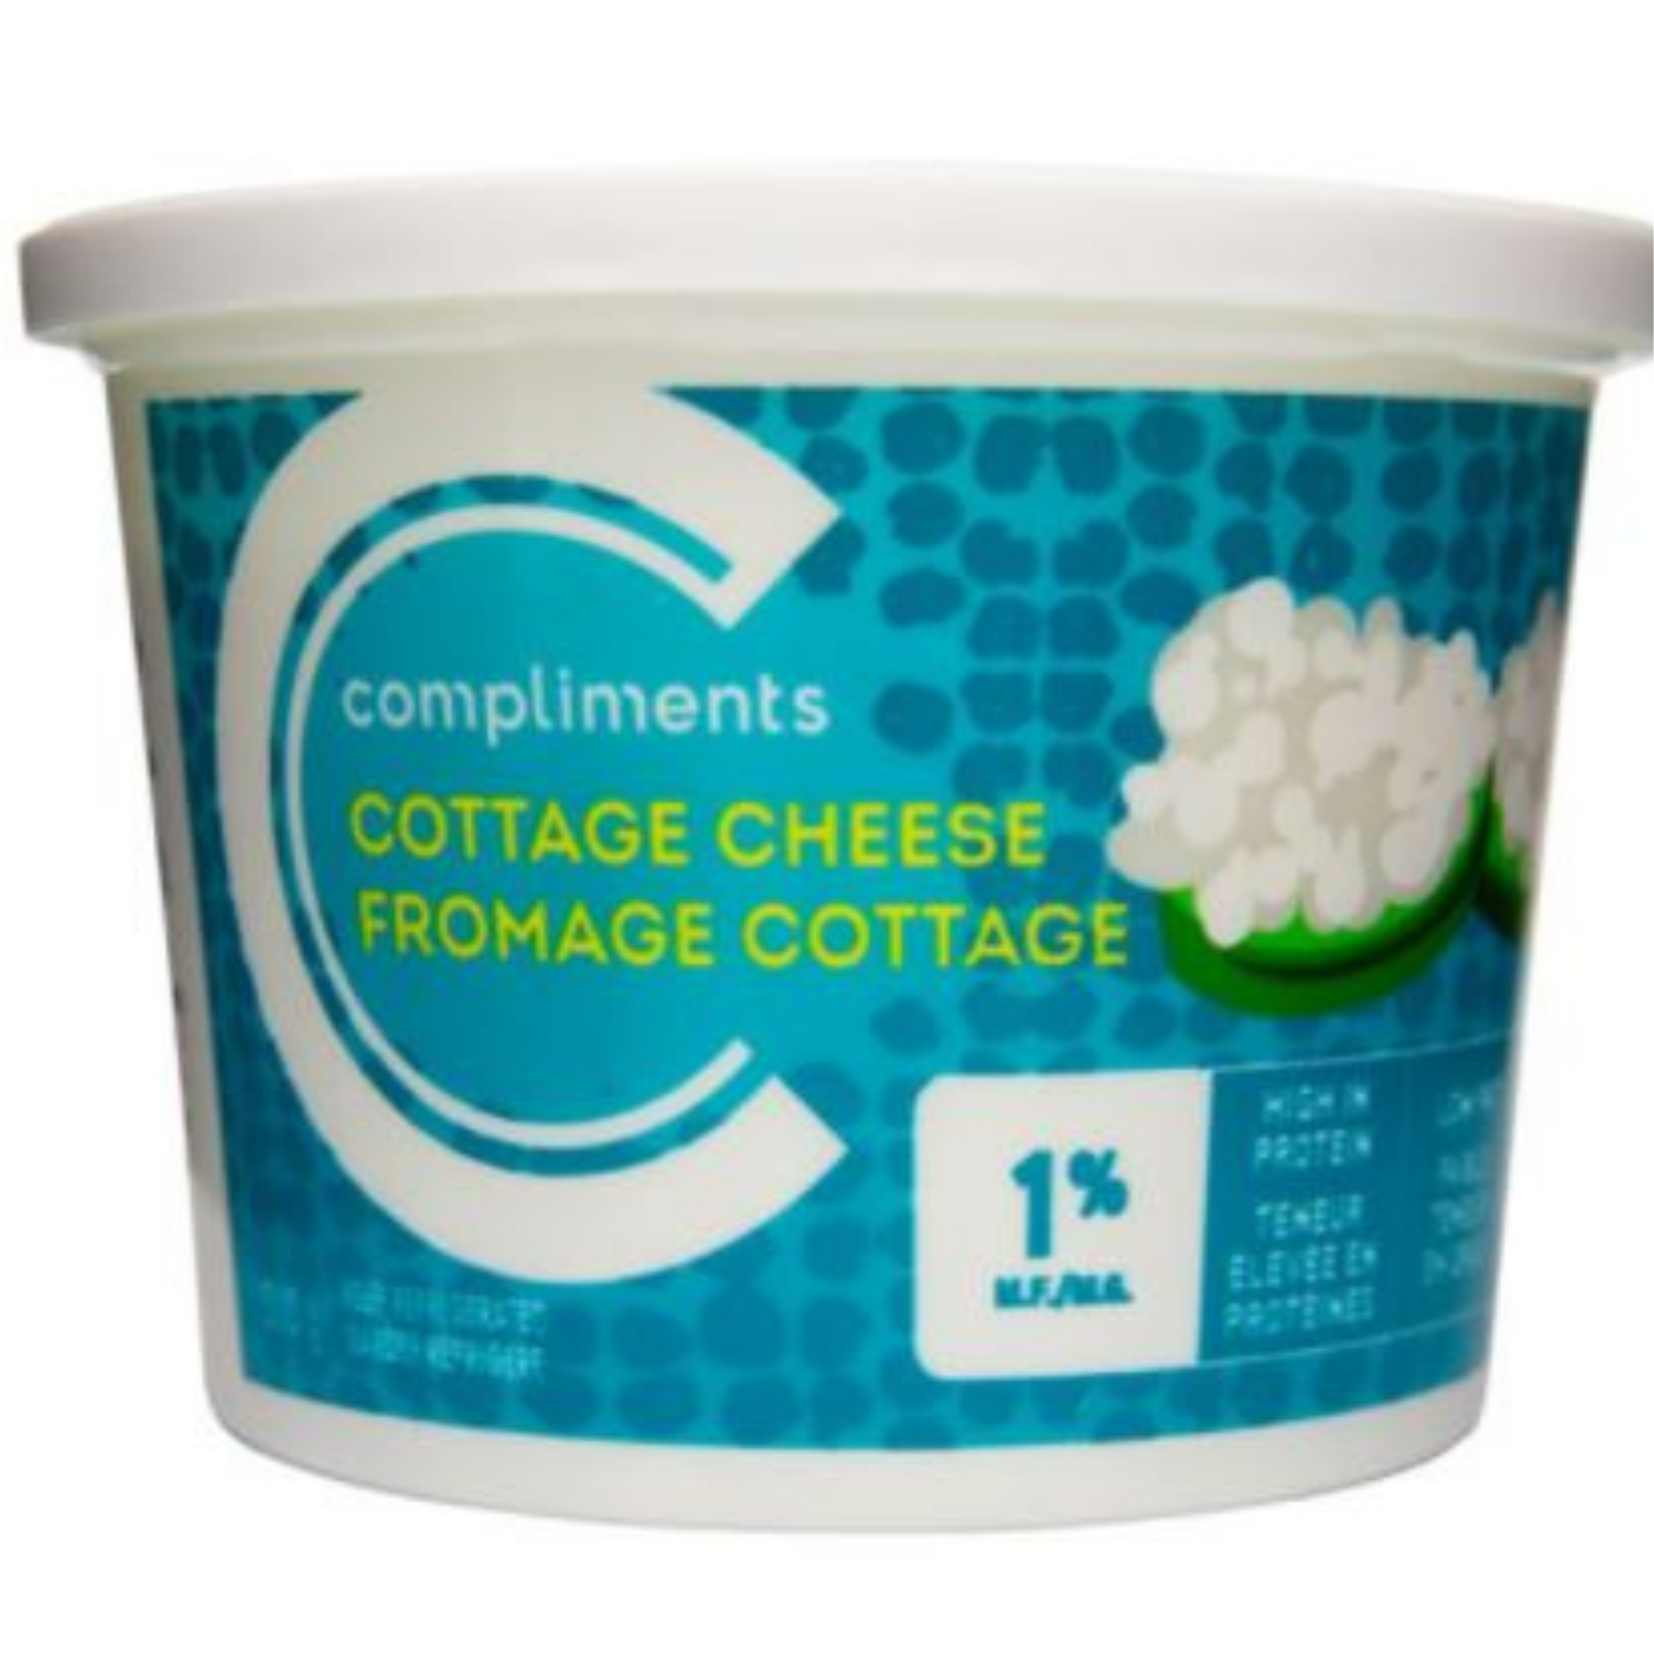 Compliments 1% Cottage Cheese 500g